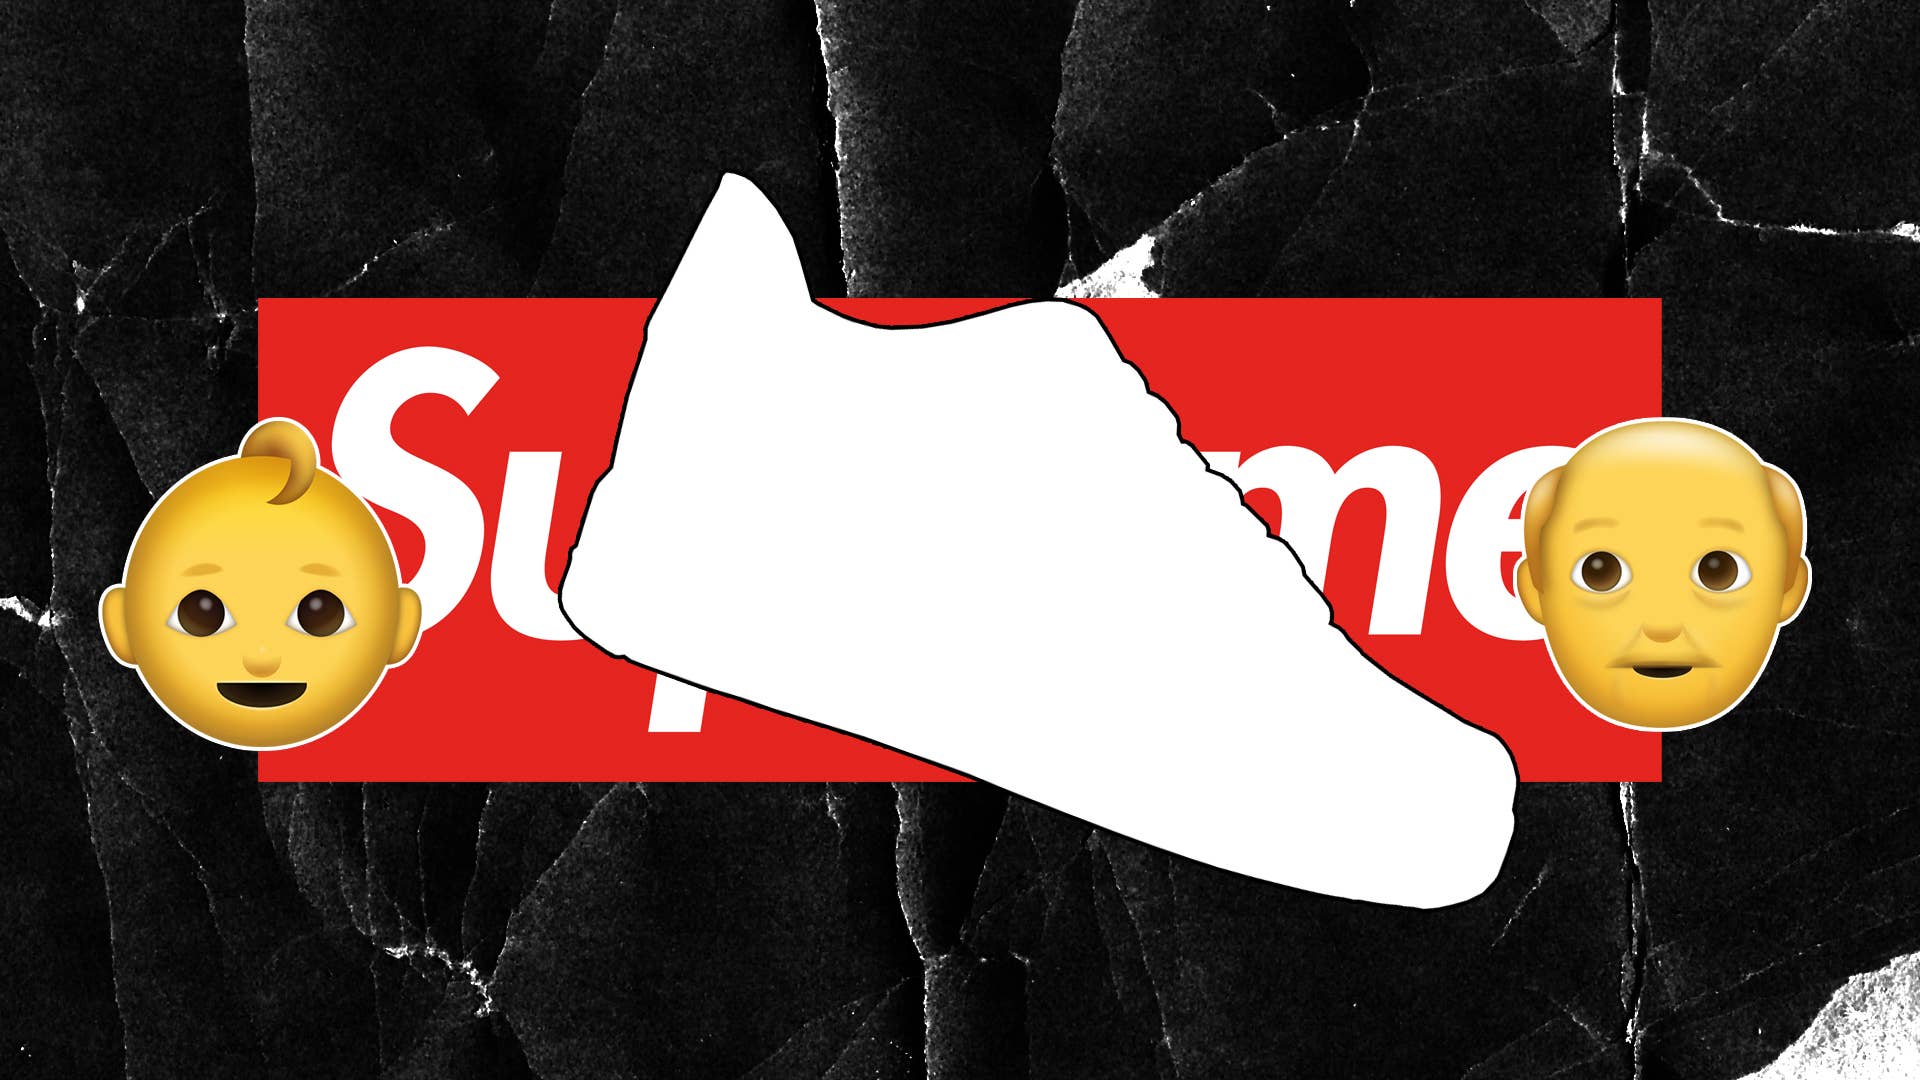 SUPREME x Nike Air Force 1 Review